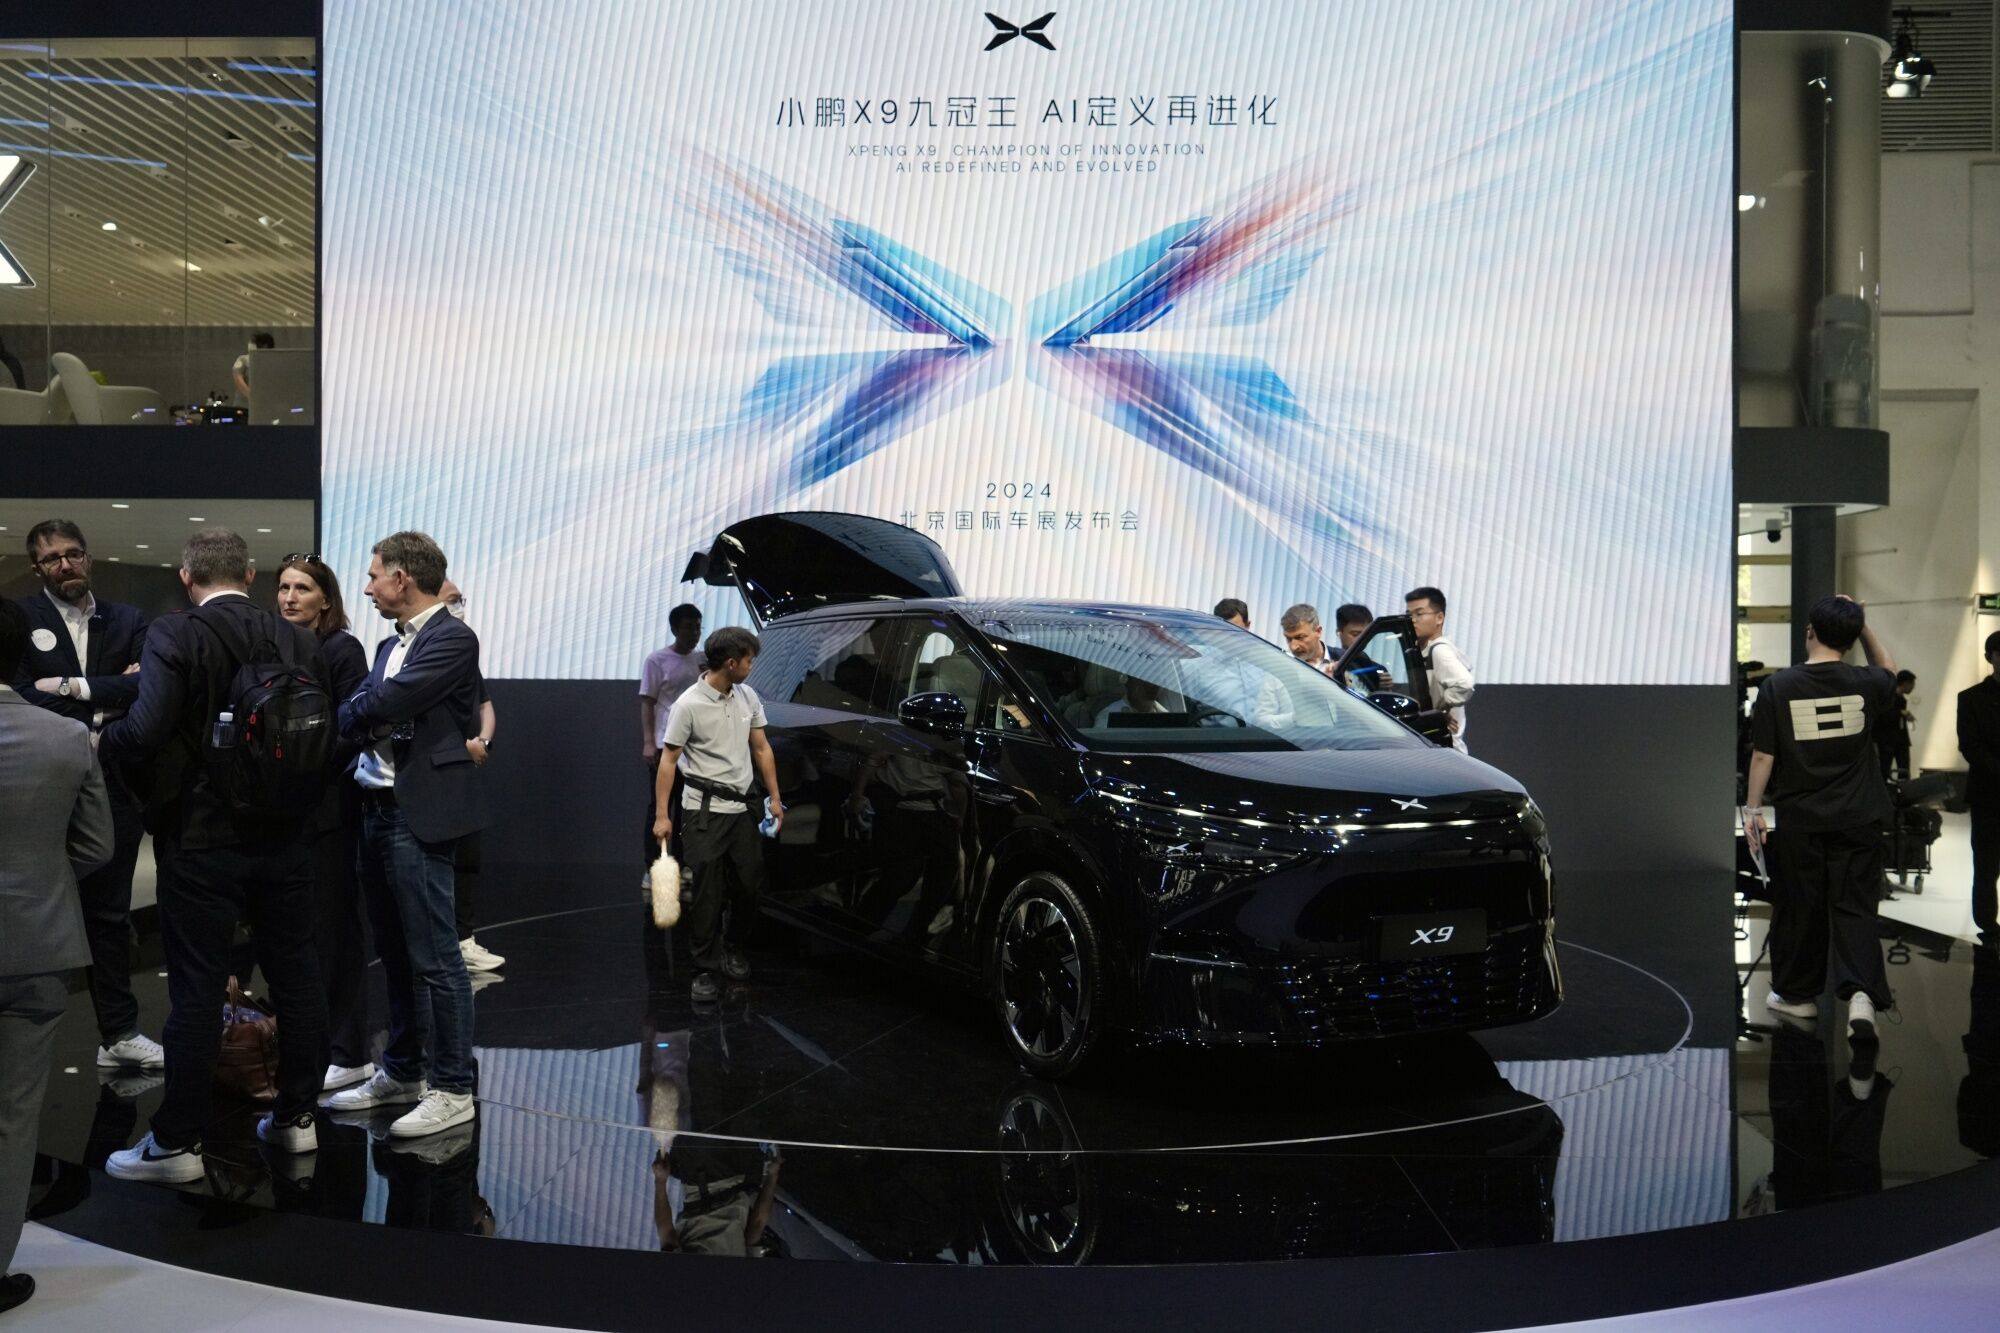 An Xpeng X9 electric vehicle on display at the Beijing Auto Show on Thursday. Photo: Bloomberg